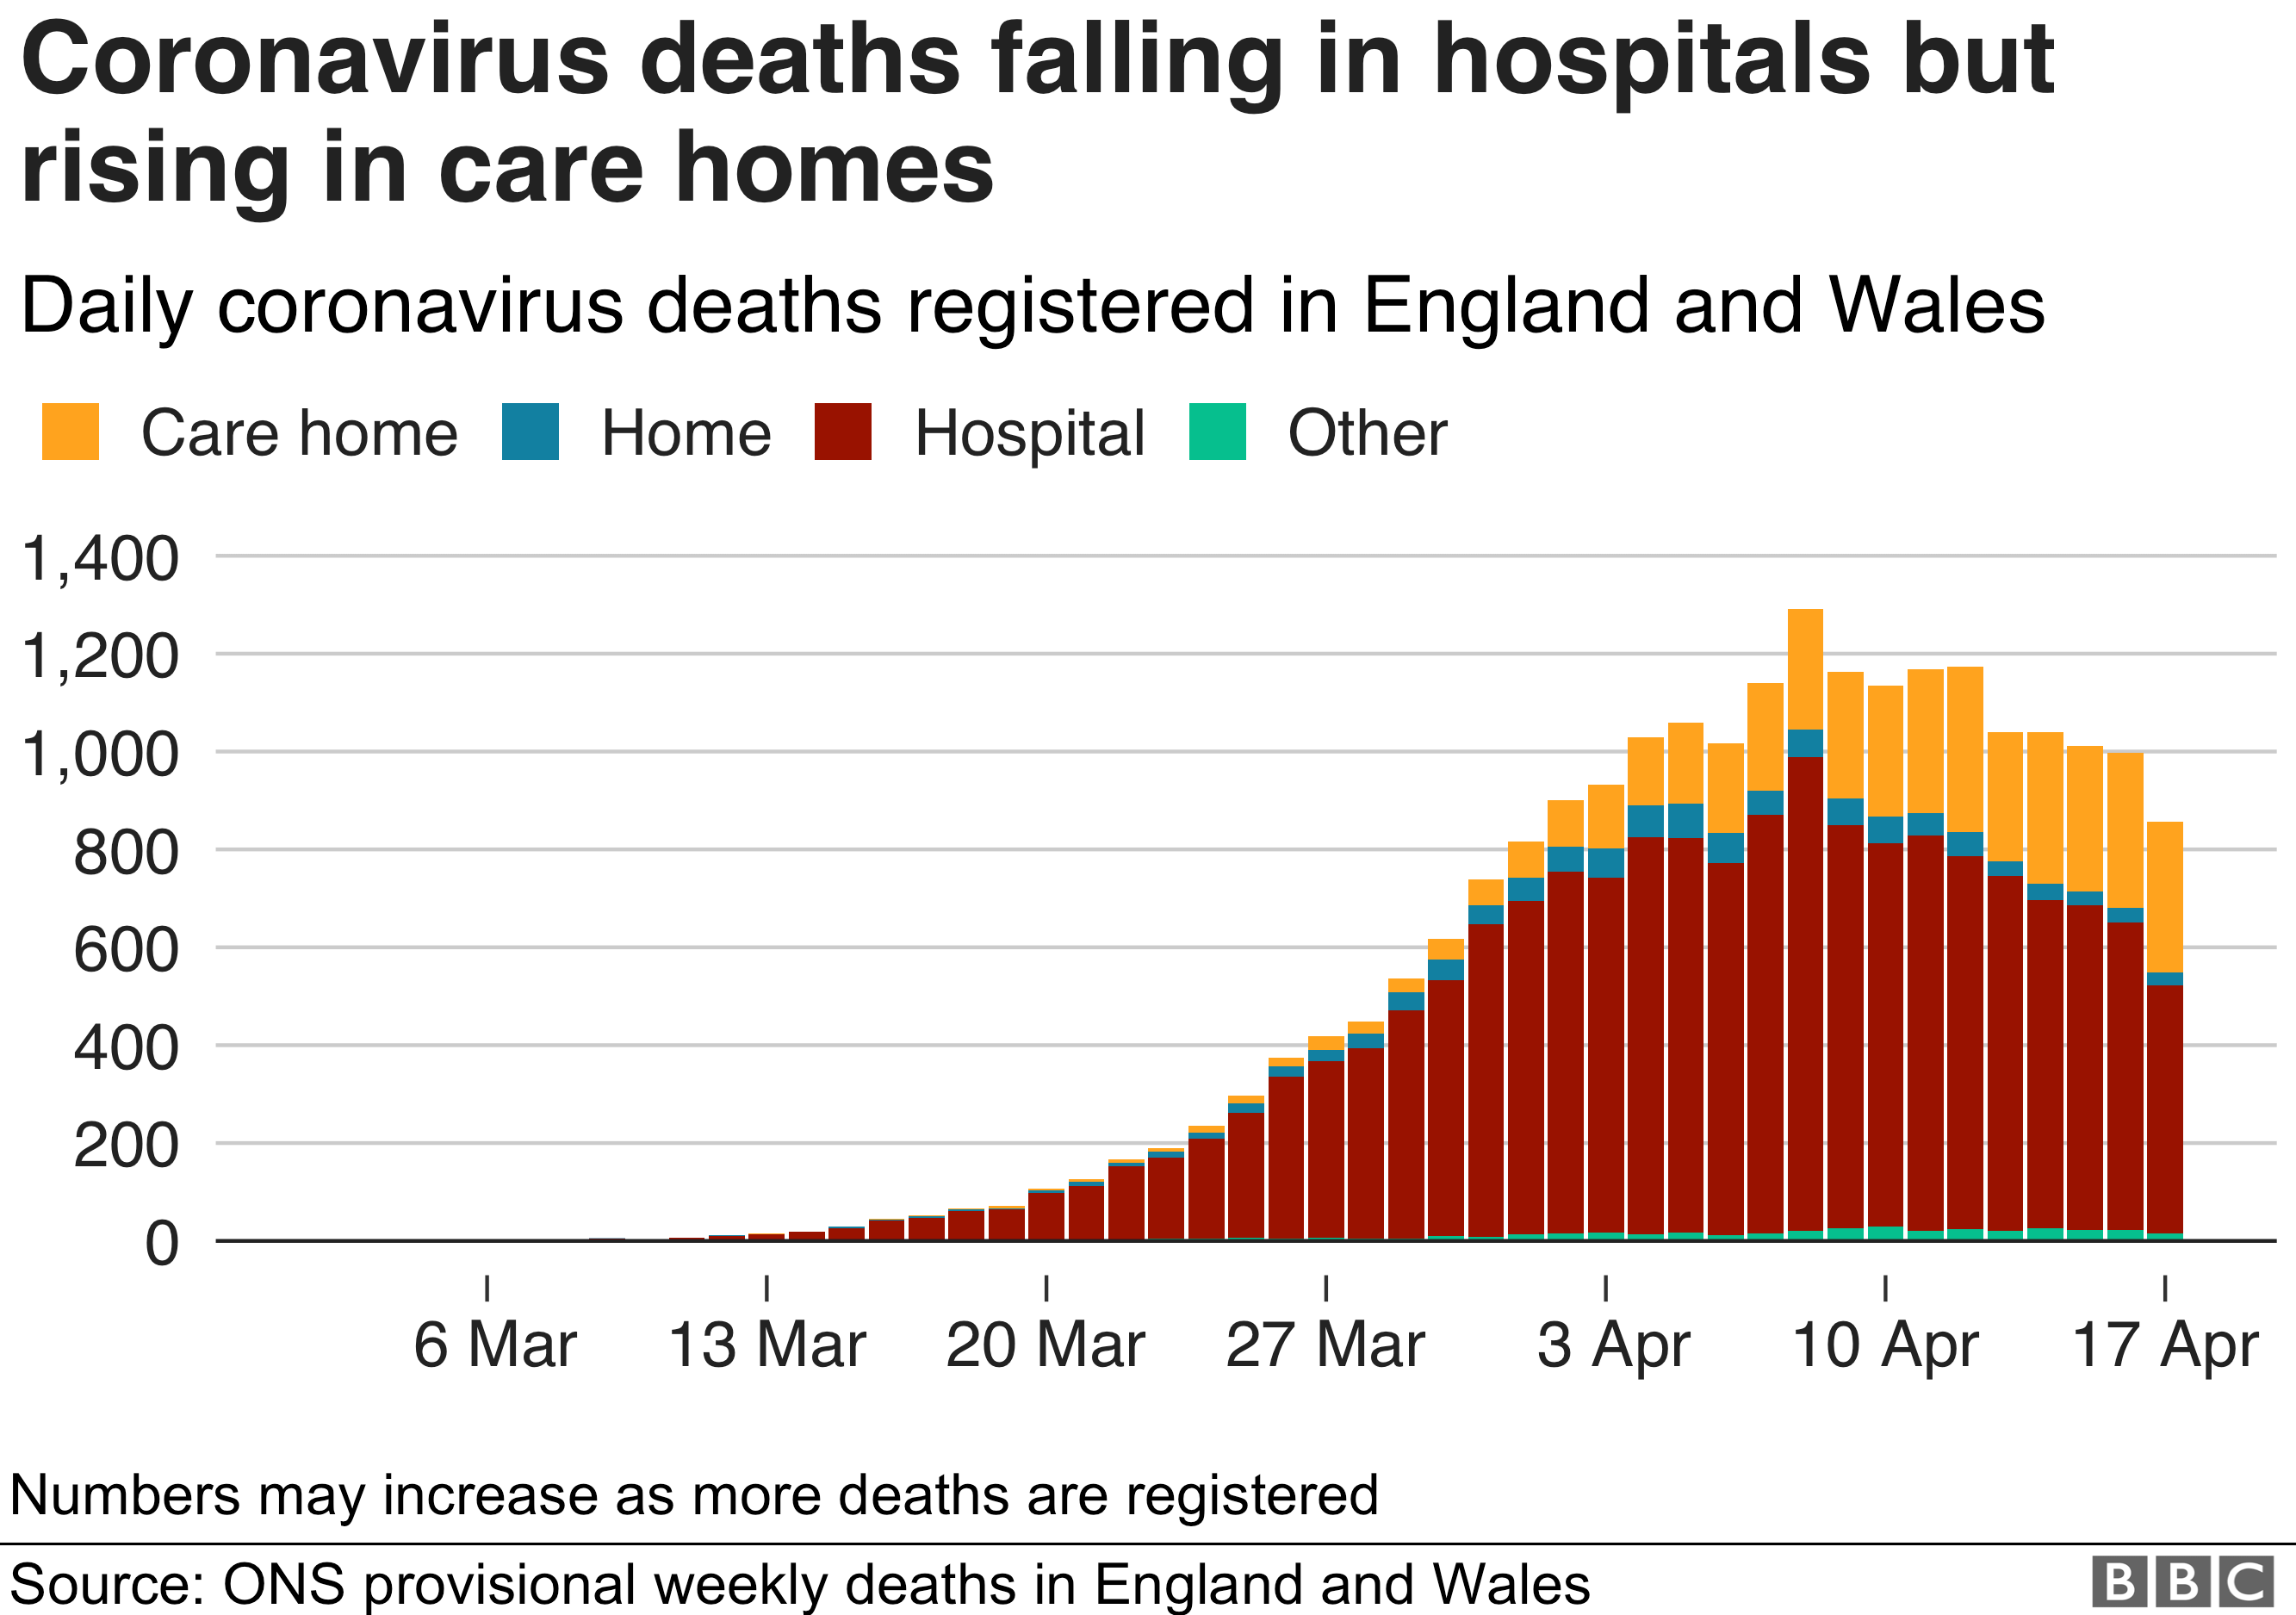 Chart from April 2020 shows coronavirus deaths rising in care homes